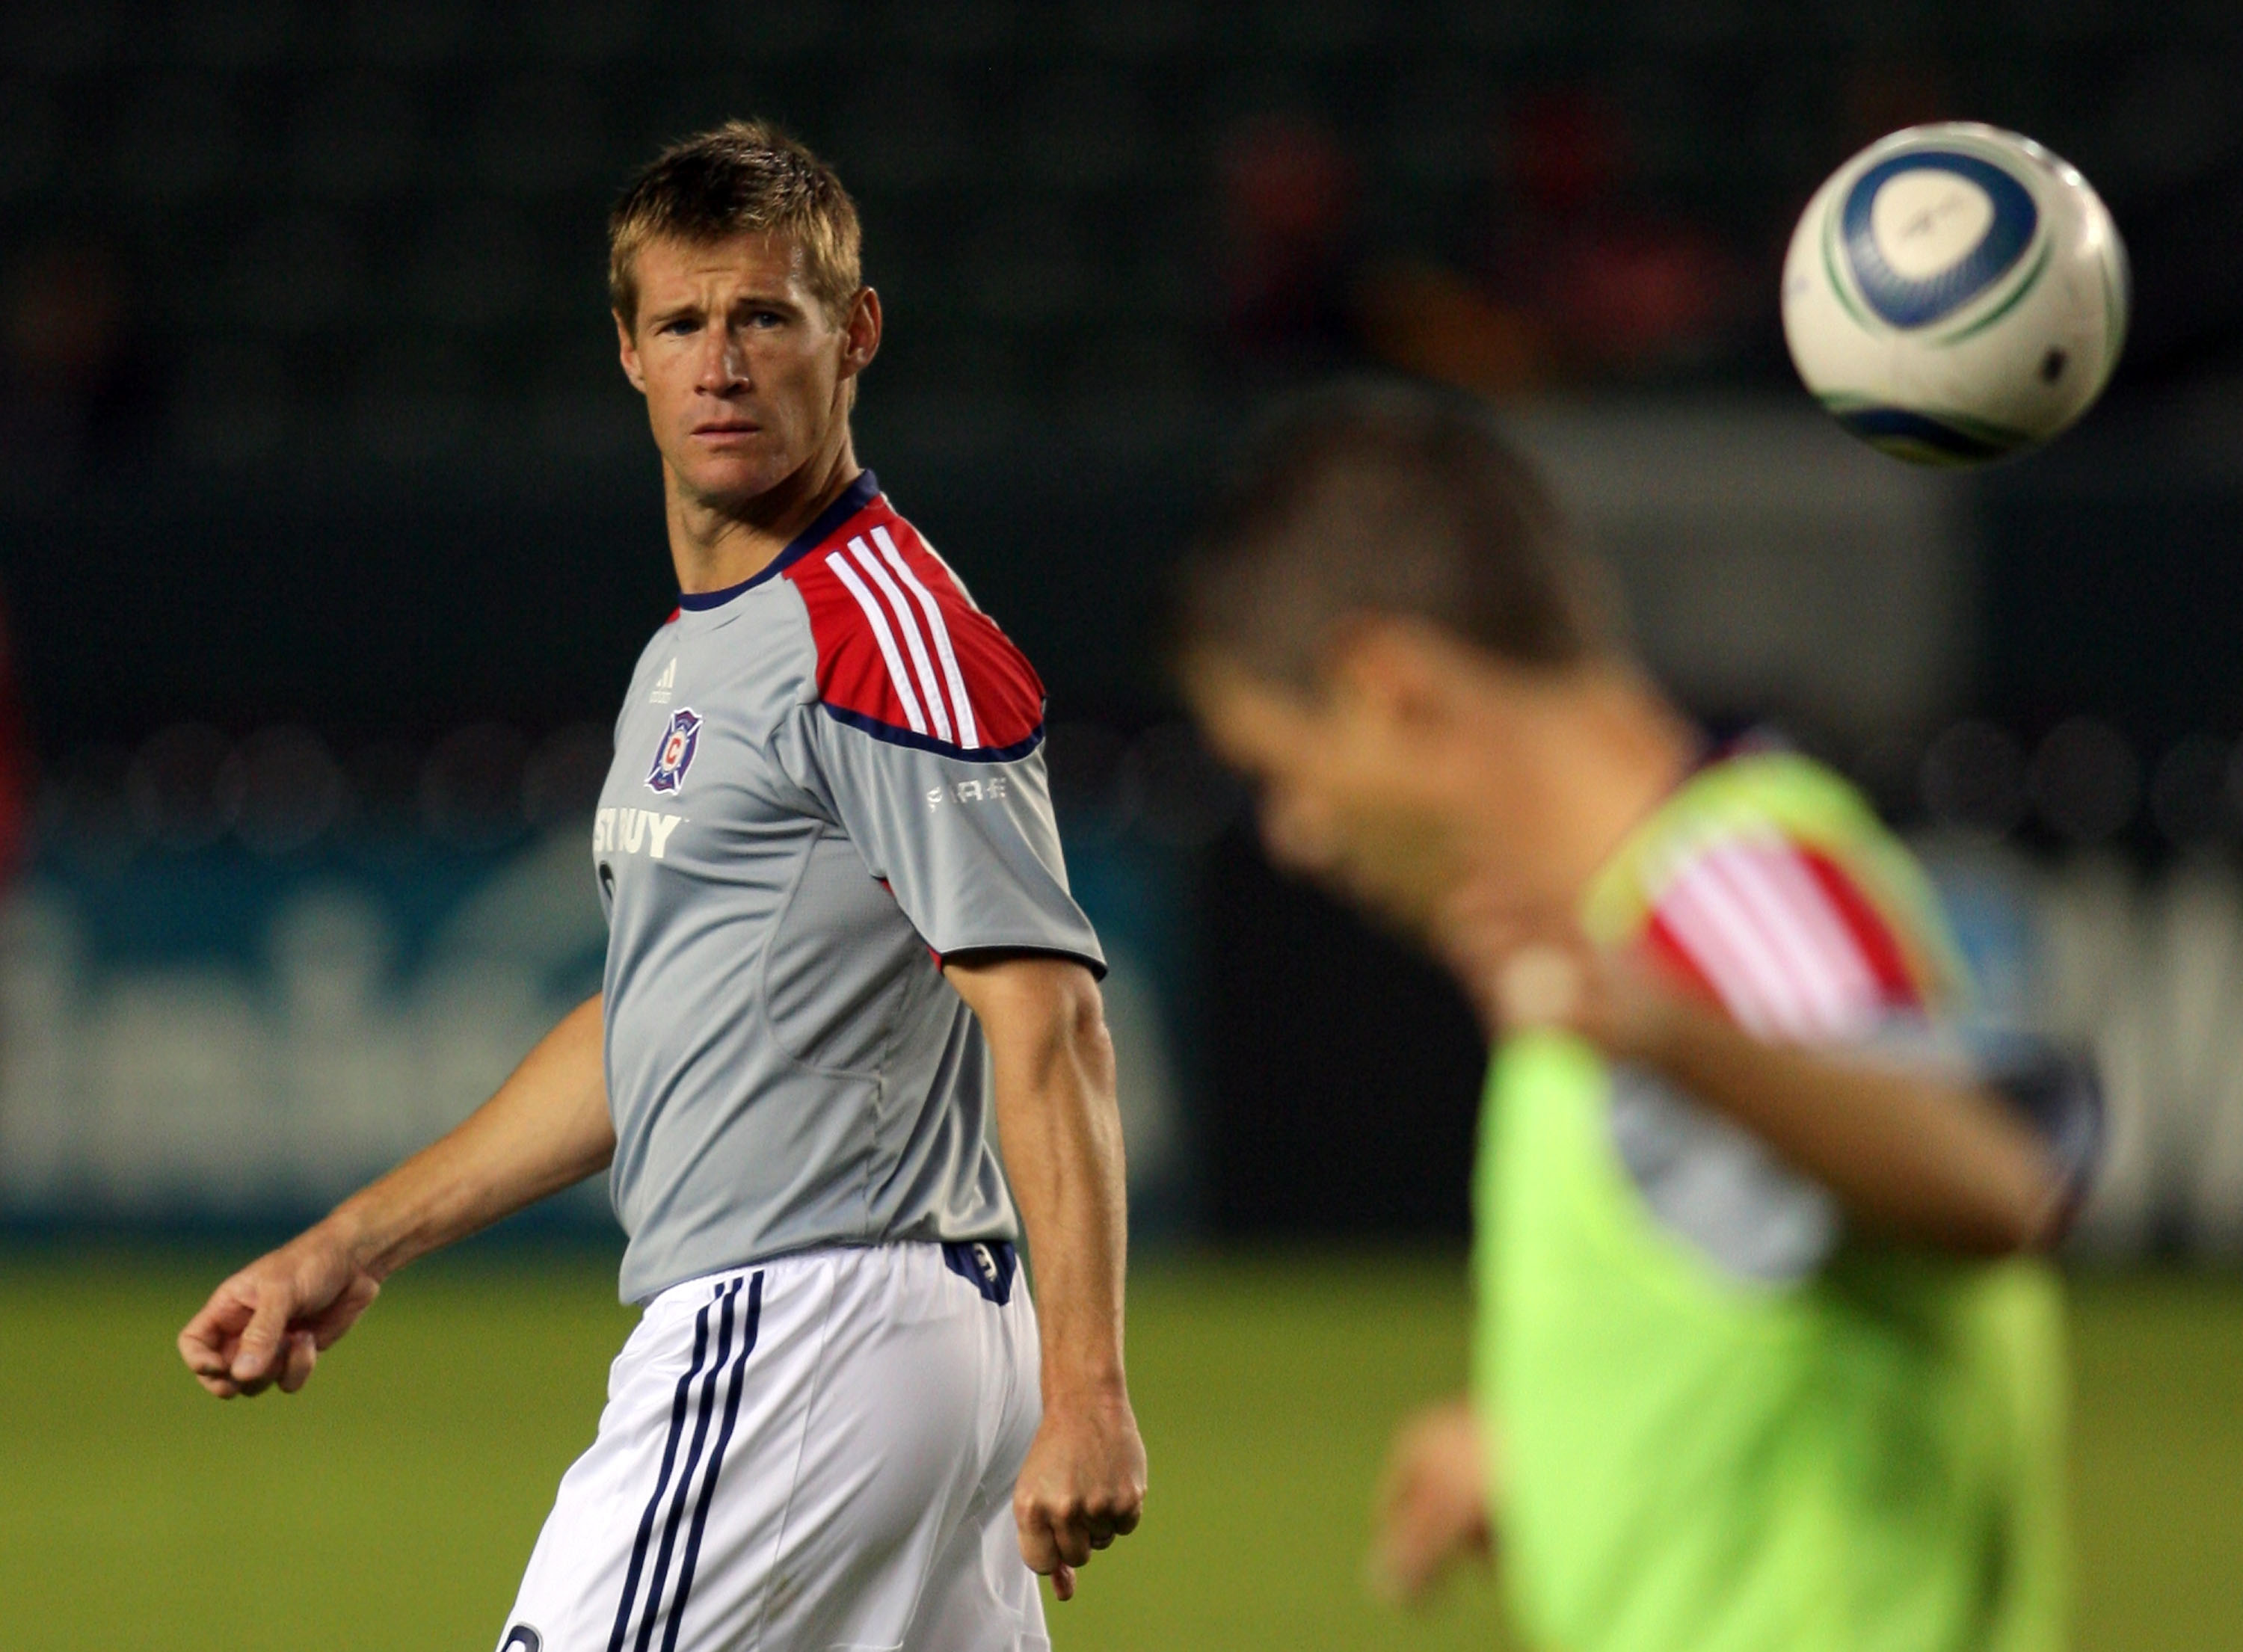 CARSON, CA - OCTOBER 23:  Brian McBride #20 of the Chicago Fire looks on during warm up prior to the MLS match against Chivas USA on October 23, 2010 in Carson, California. McBride will play his last MLS match against Chivas USA prior to retiring after th